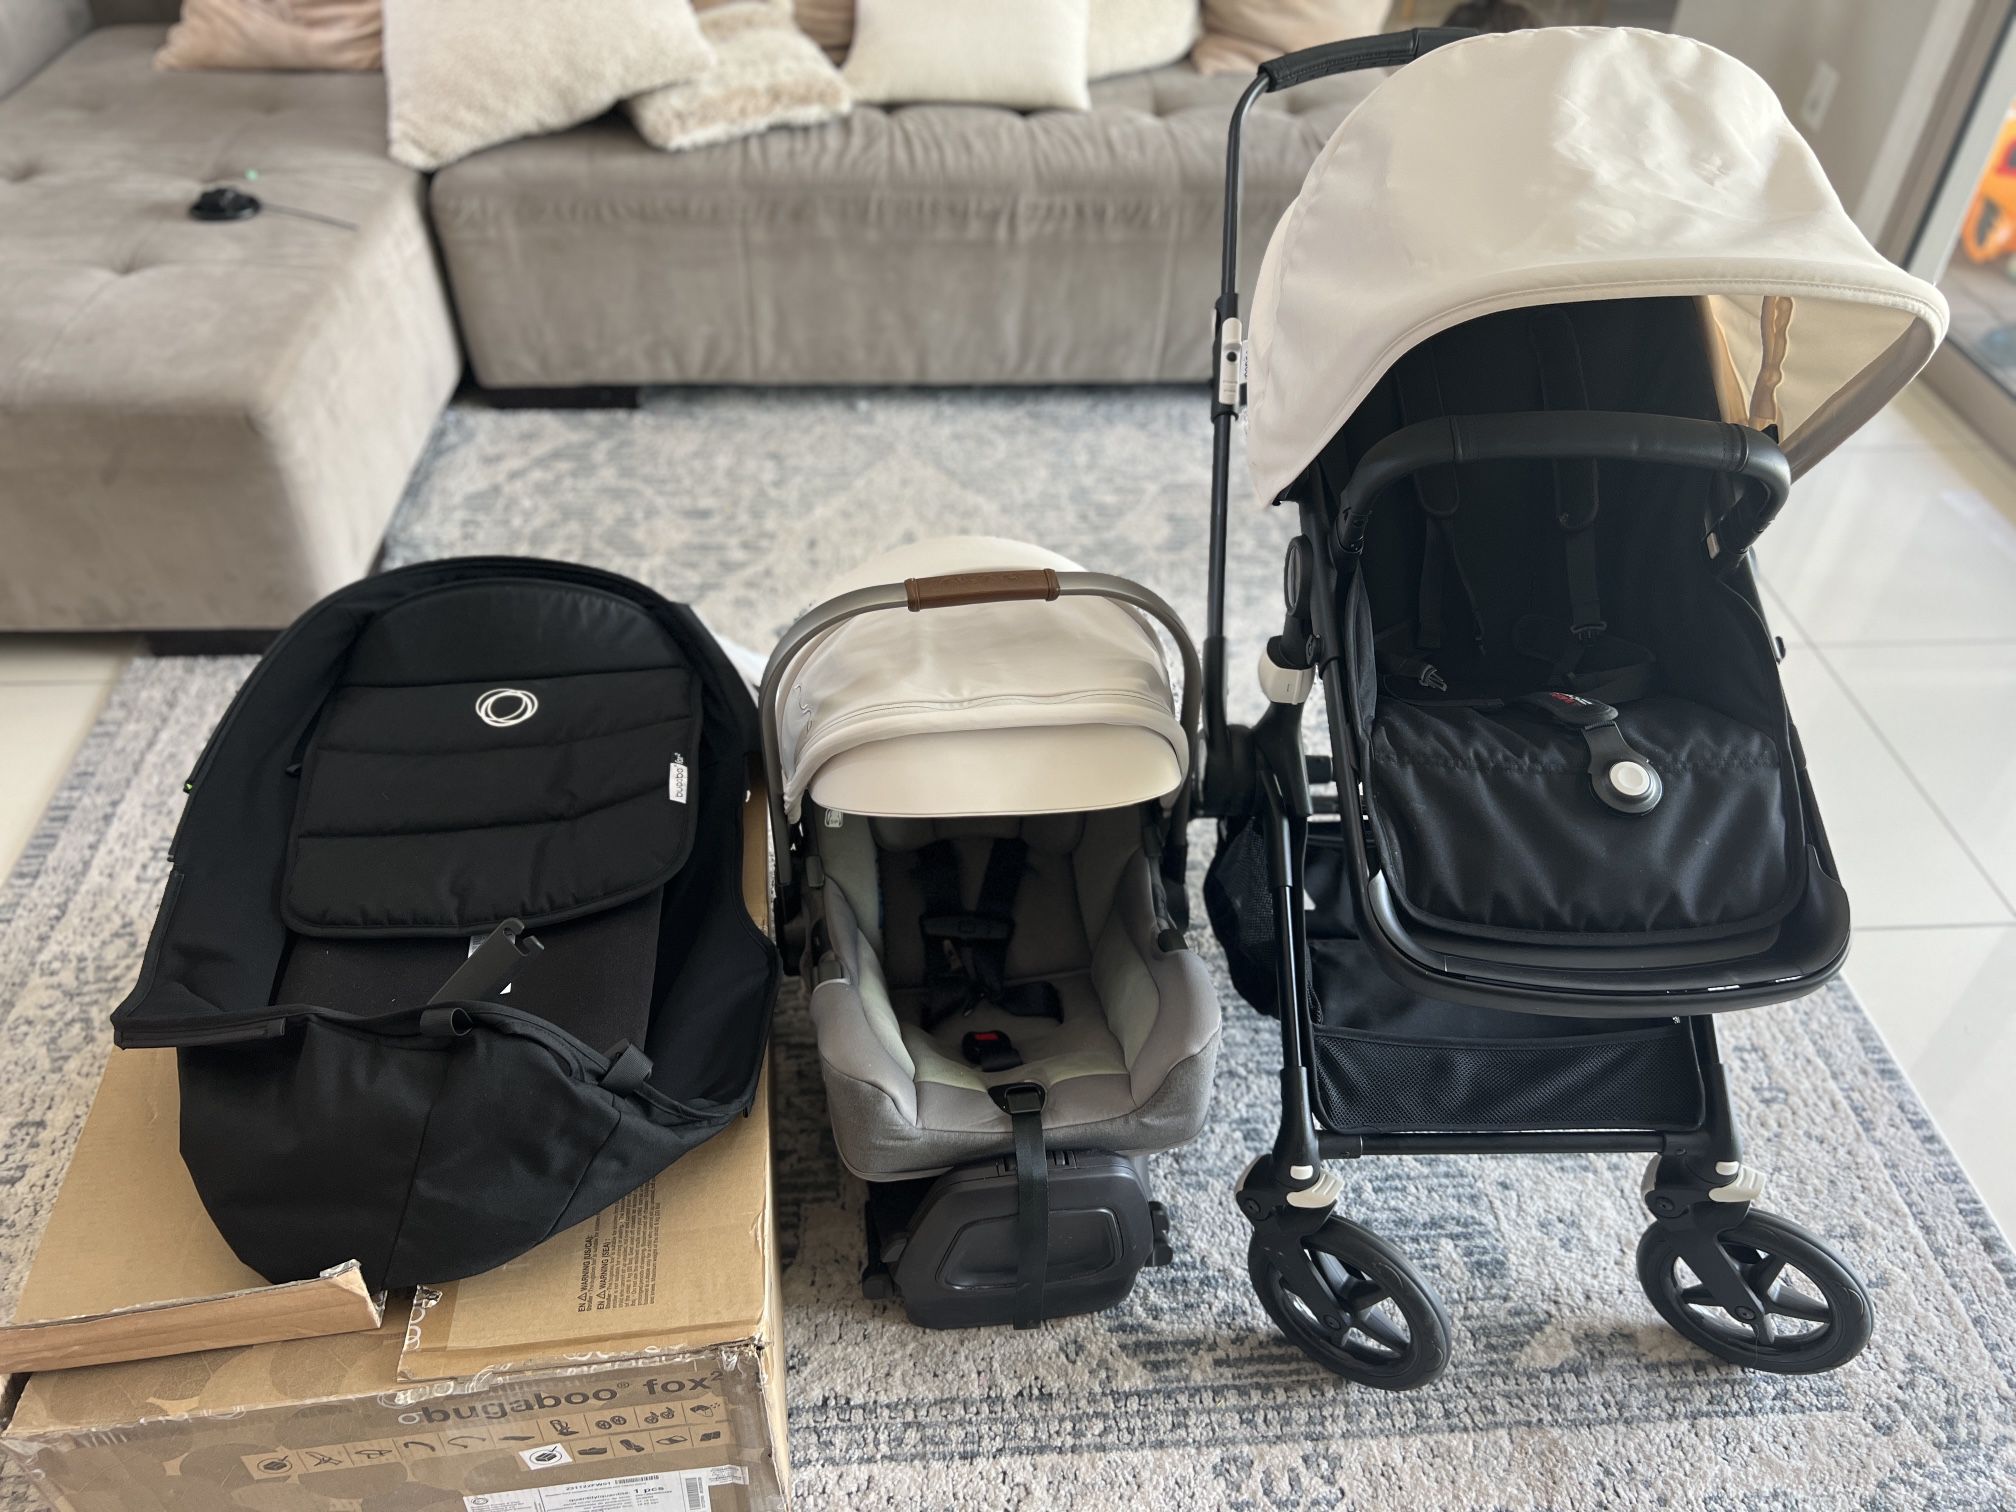 Complete Travel System - Nuna PIPA RX + RELX Base + Adapter For Bugaboo Fox2 Complete Stroller - Black Frame/White Canopy